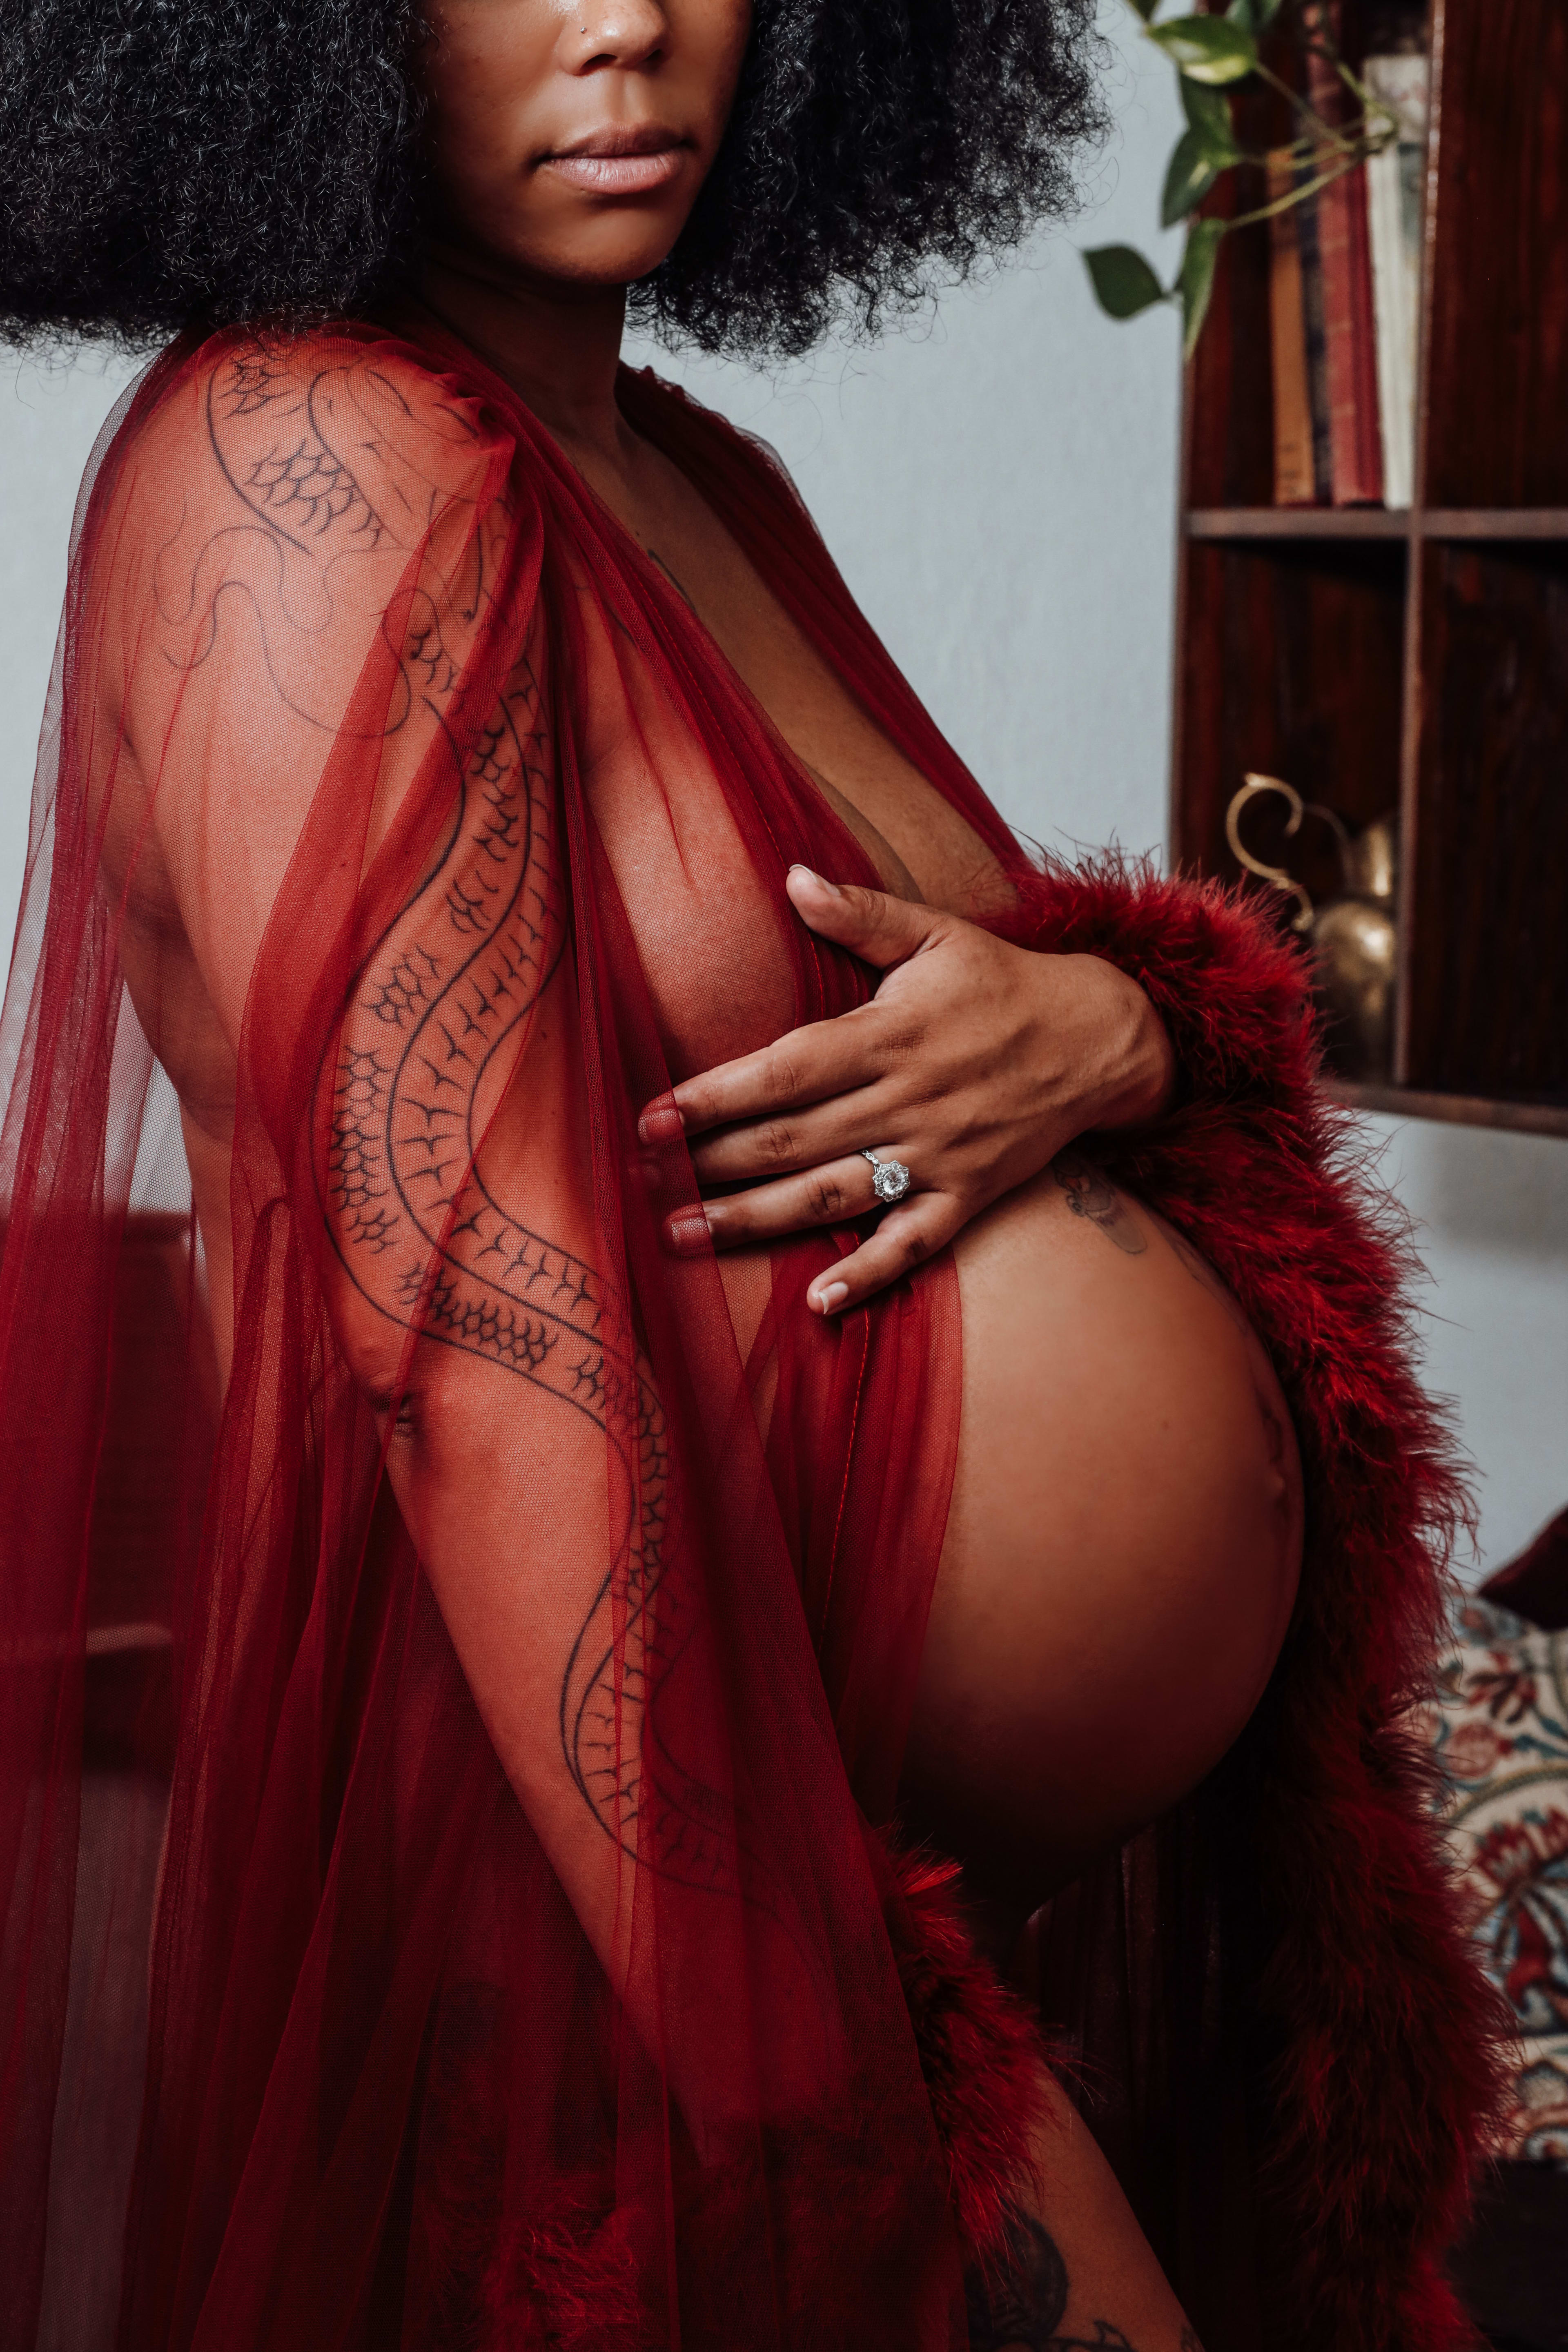 A woman in a sheer red maternity dress with tattoos on her body.